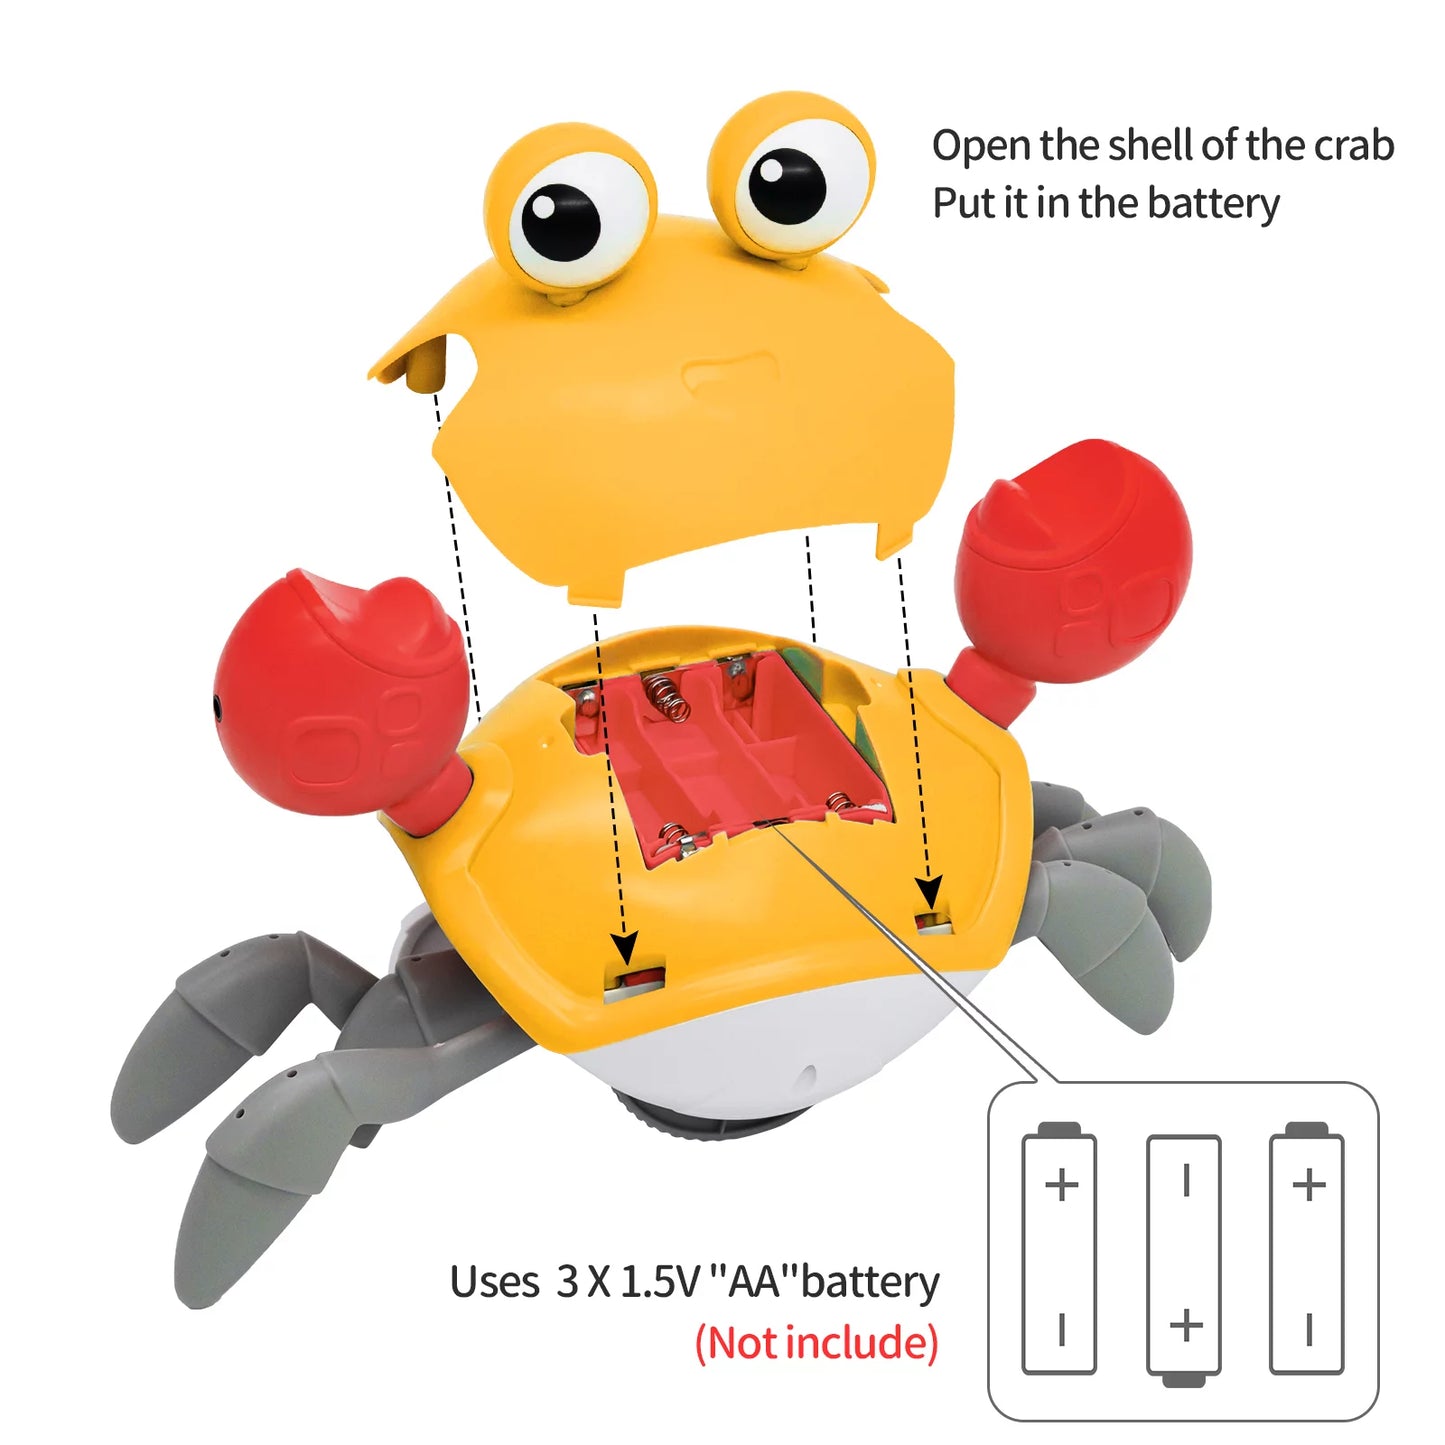 Crawling Crab Toy for Baby Tummy Time with Music, Cute Walking Crab Babies Sensory Toy